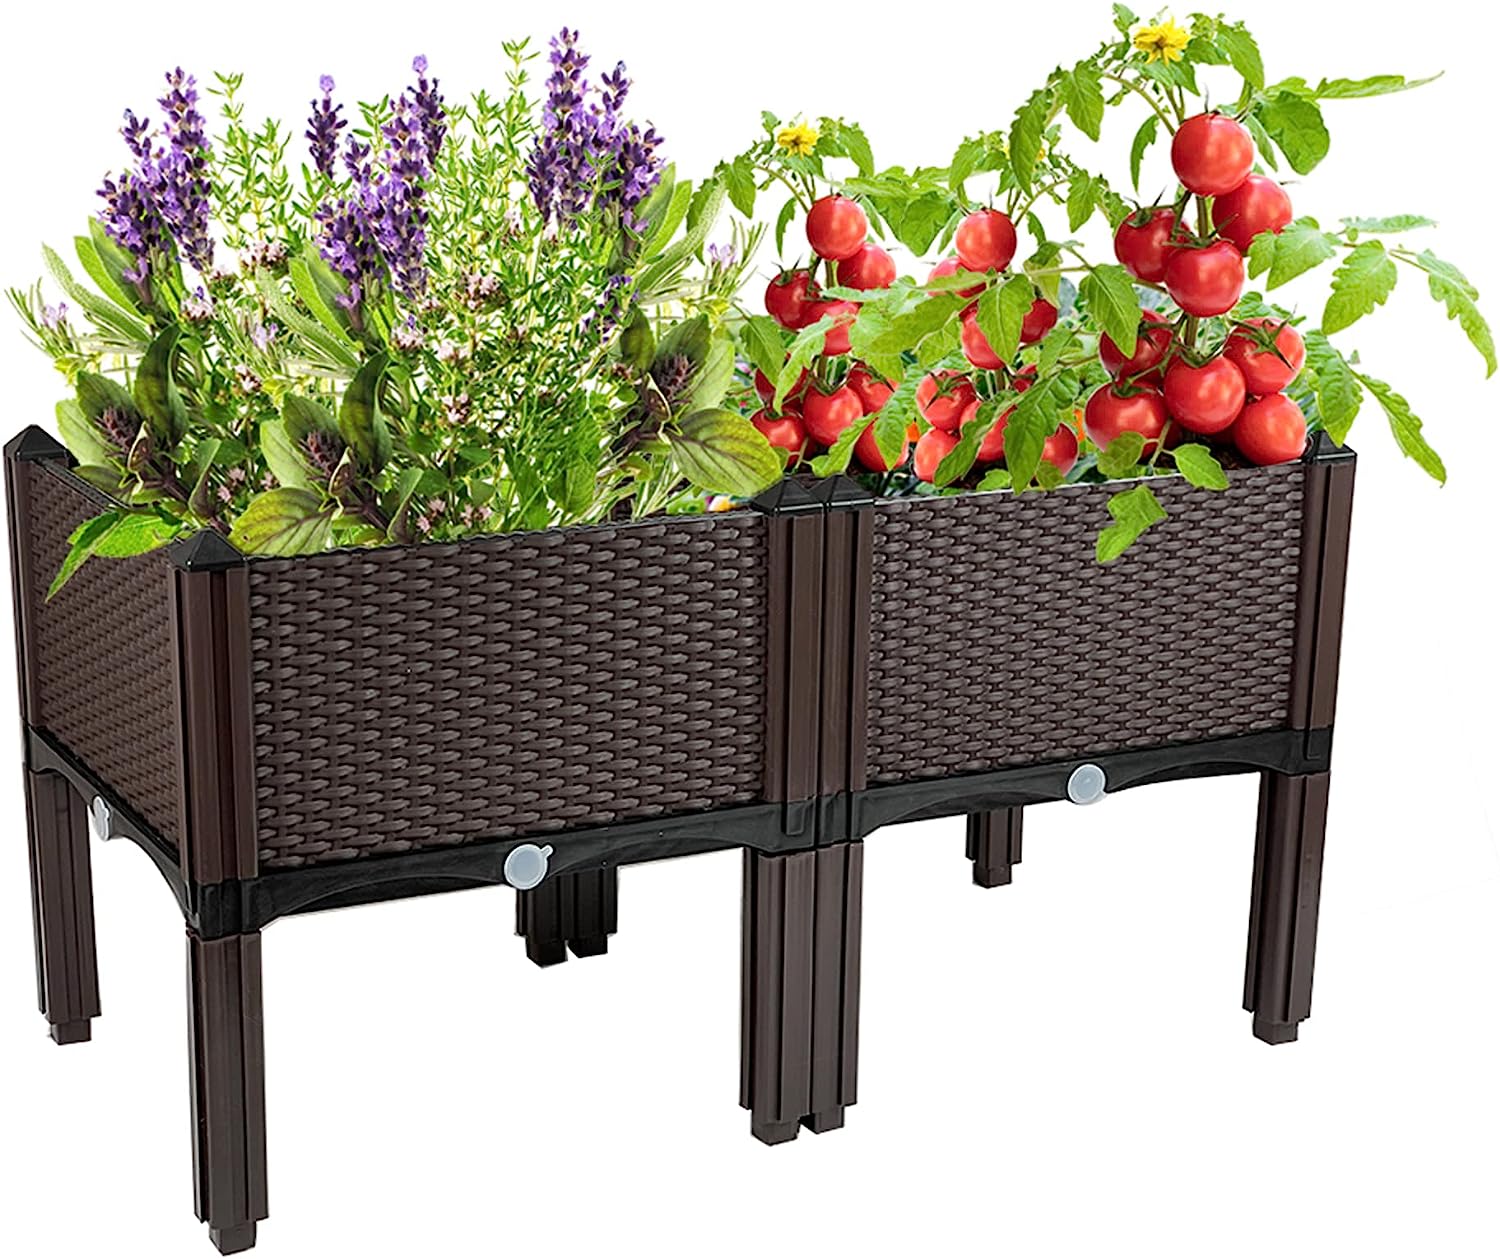 TDDSS Raised Garden Bed with Legs Planters for Outdoor [...]